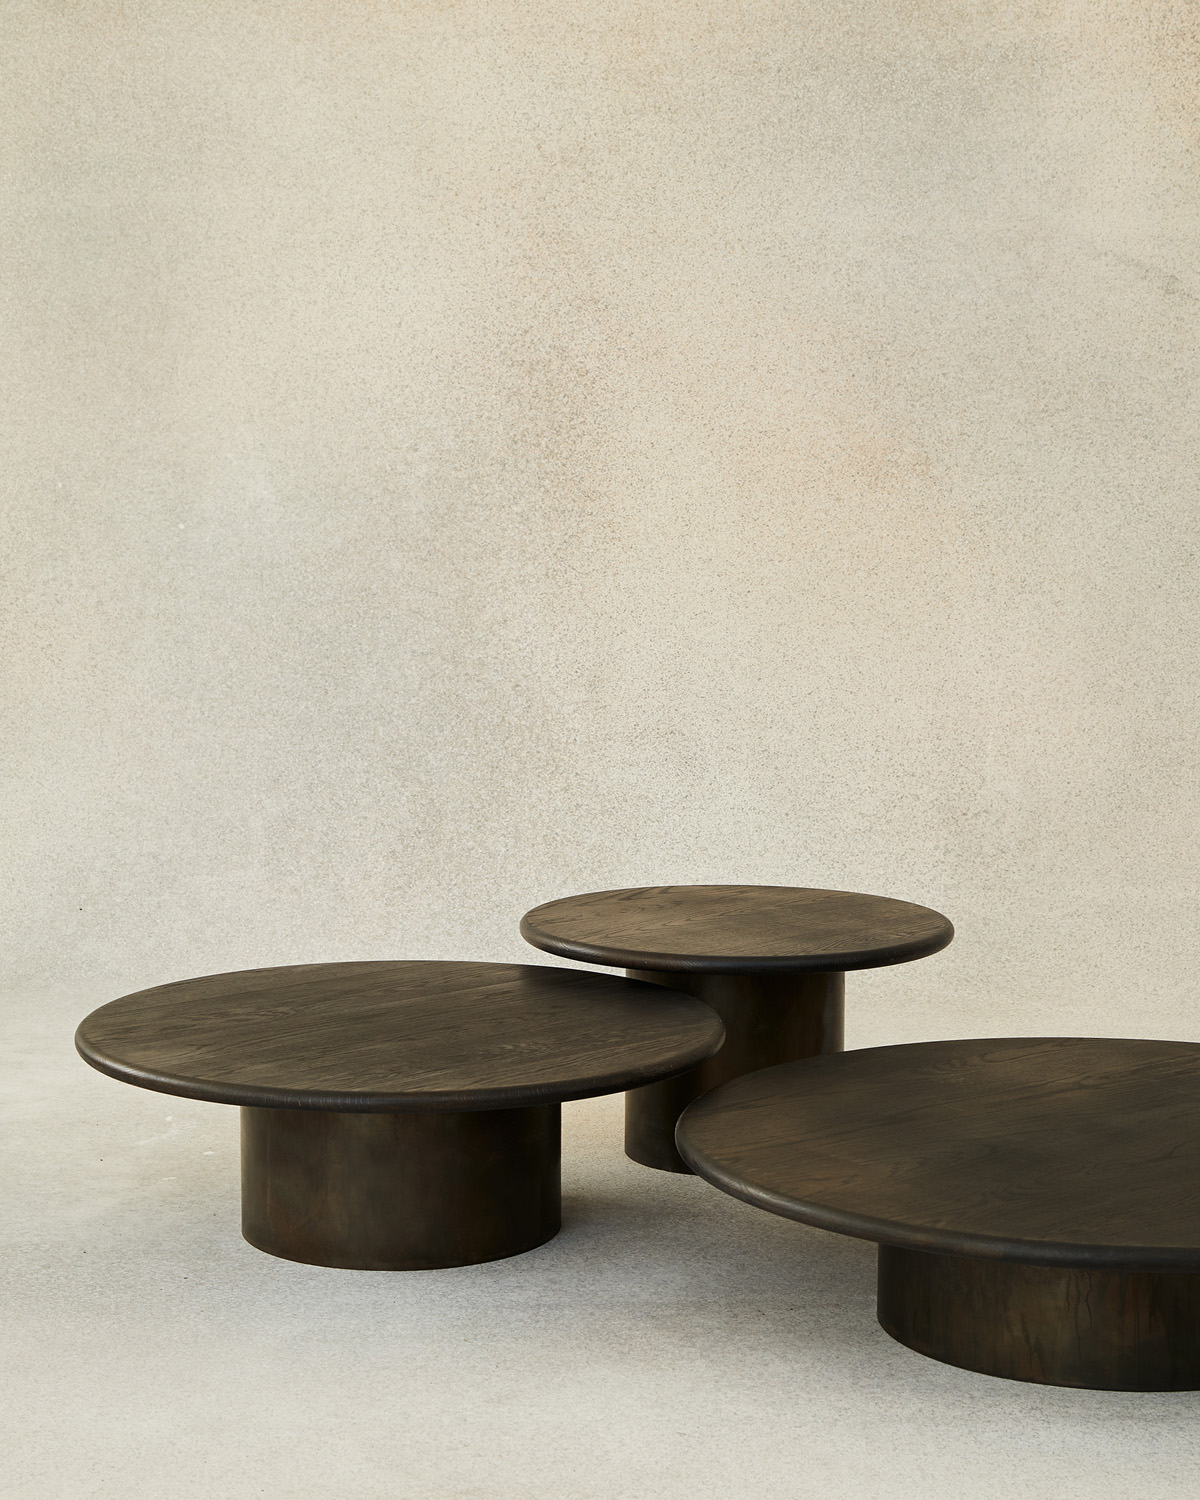 Low tables by Fred Rigby - artisinal furniture maker in UK